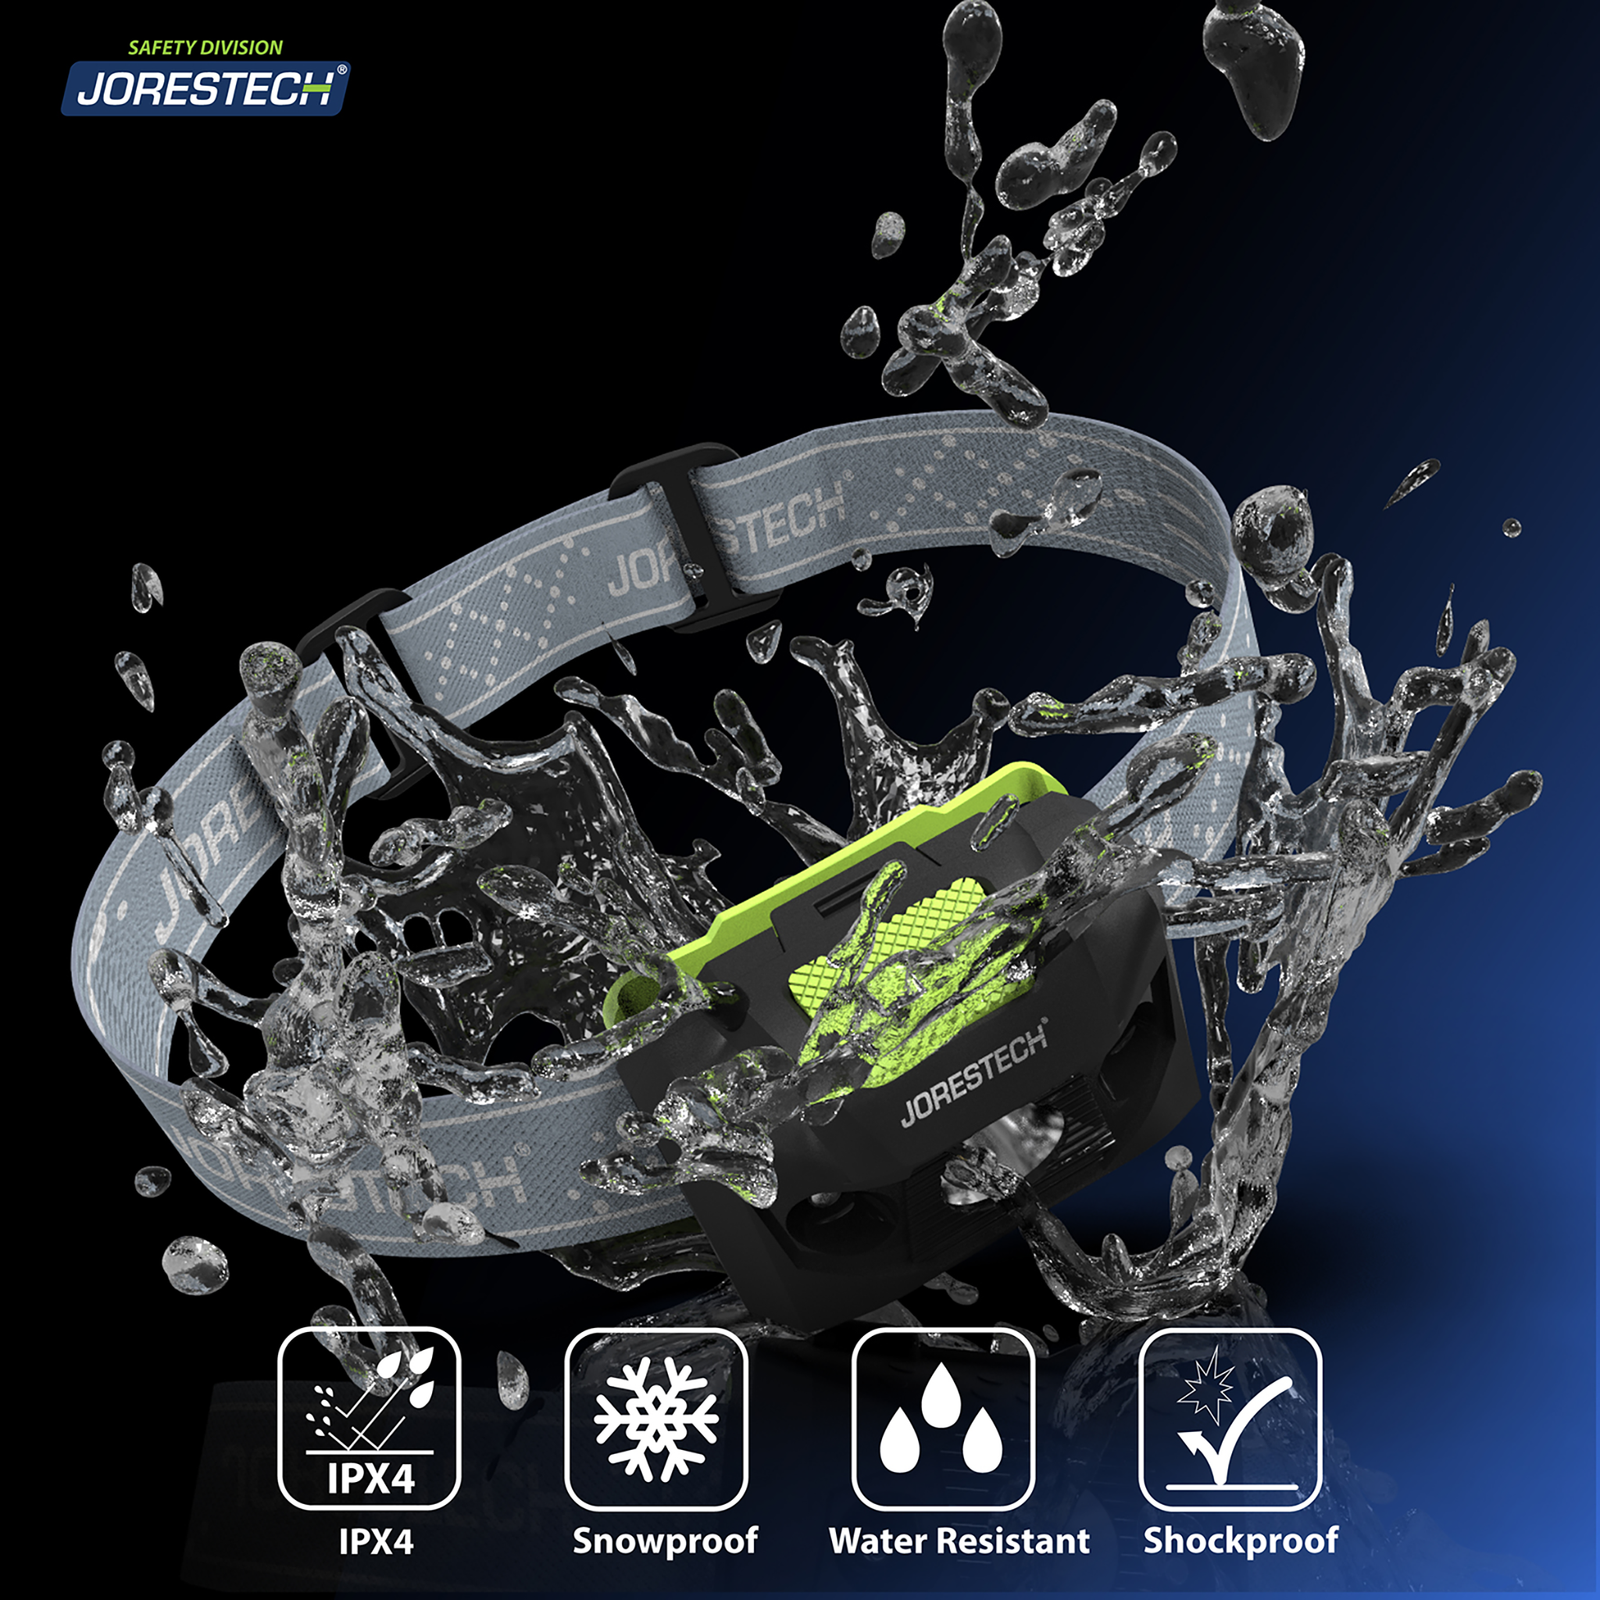 Black head lamp been splashed by water to show that the are water resistant, snow resistant and shockproof